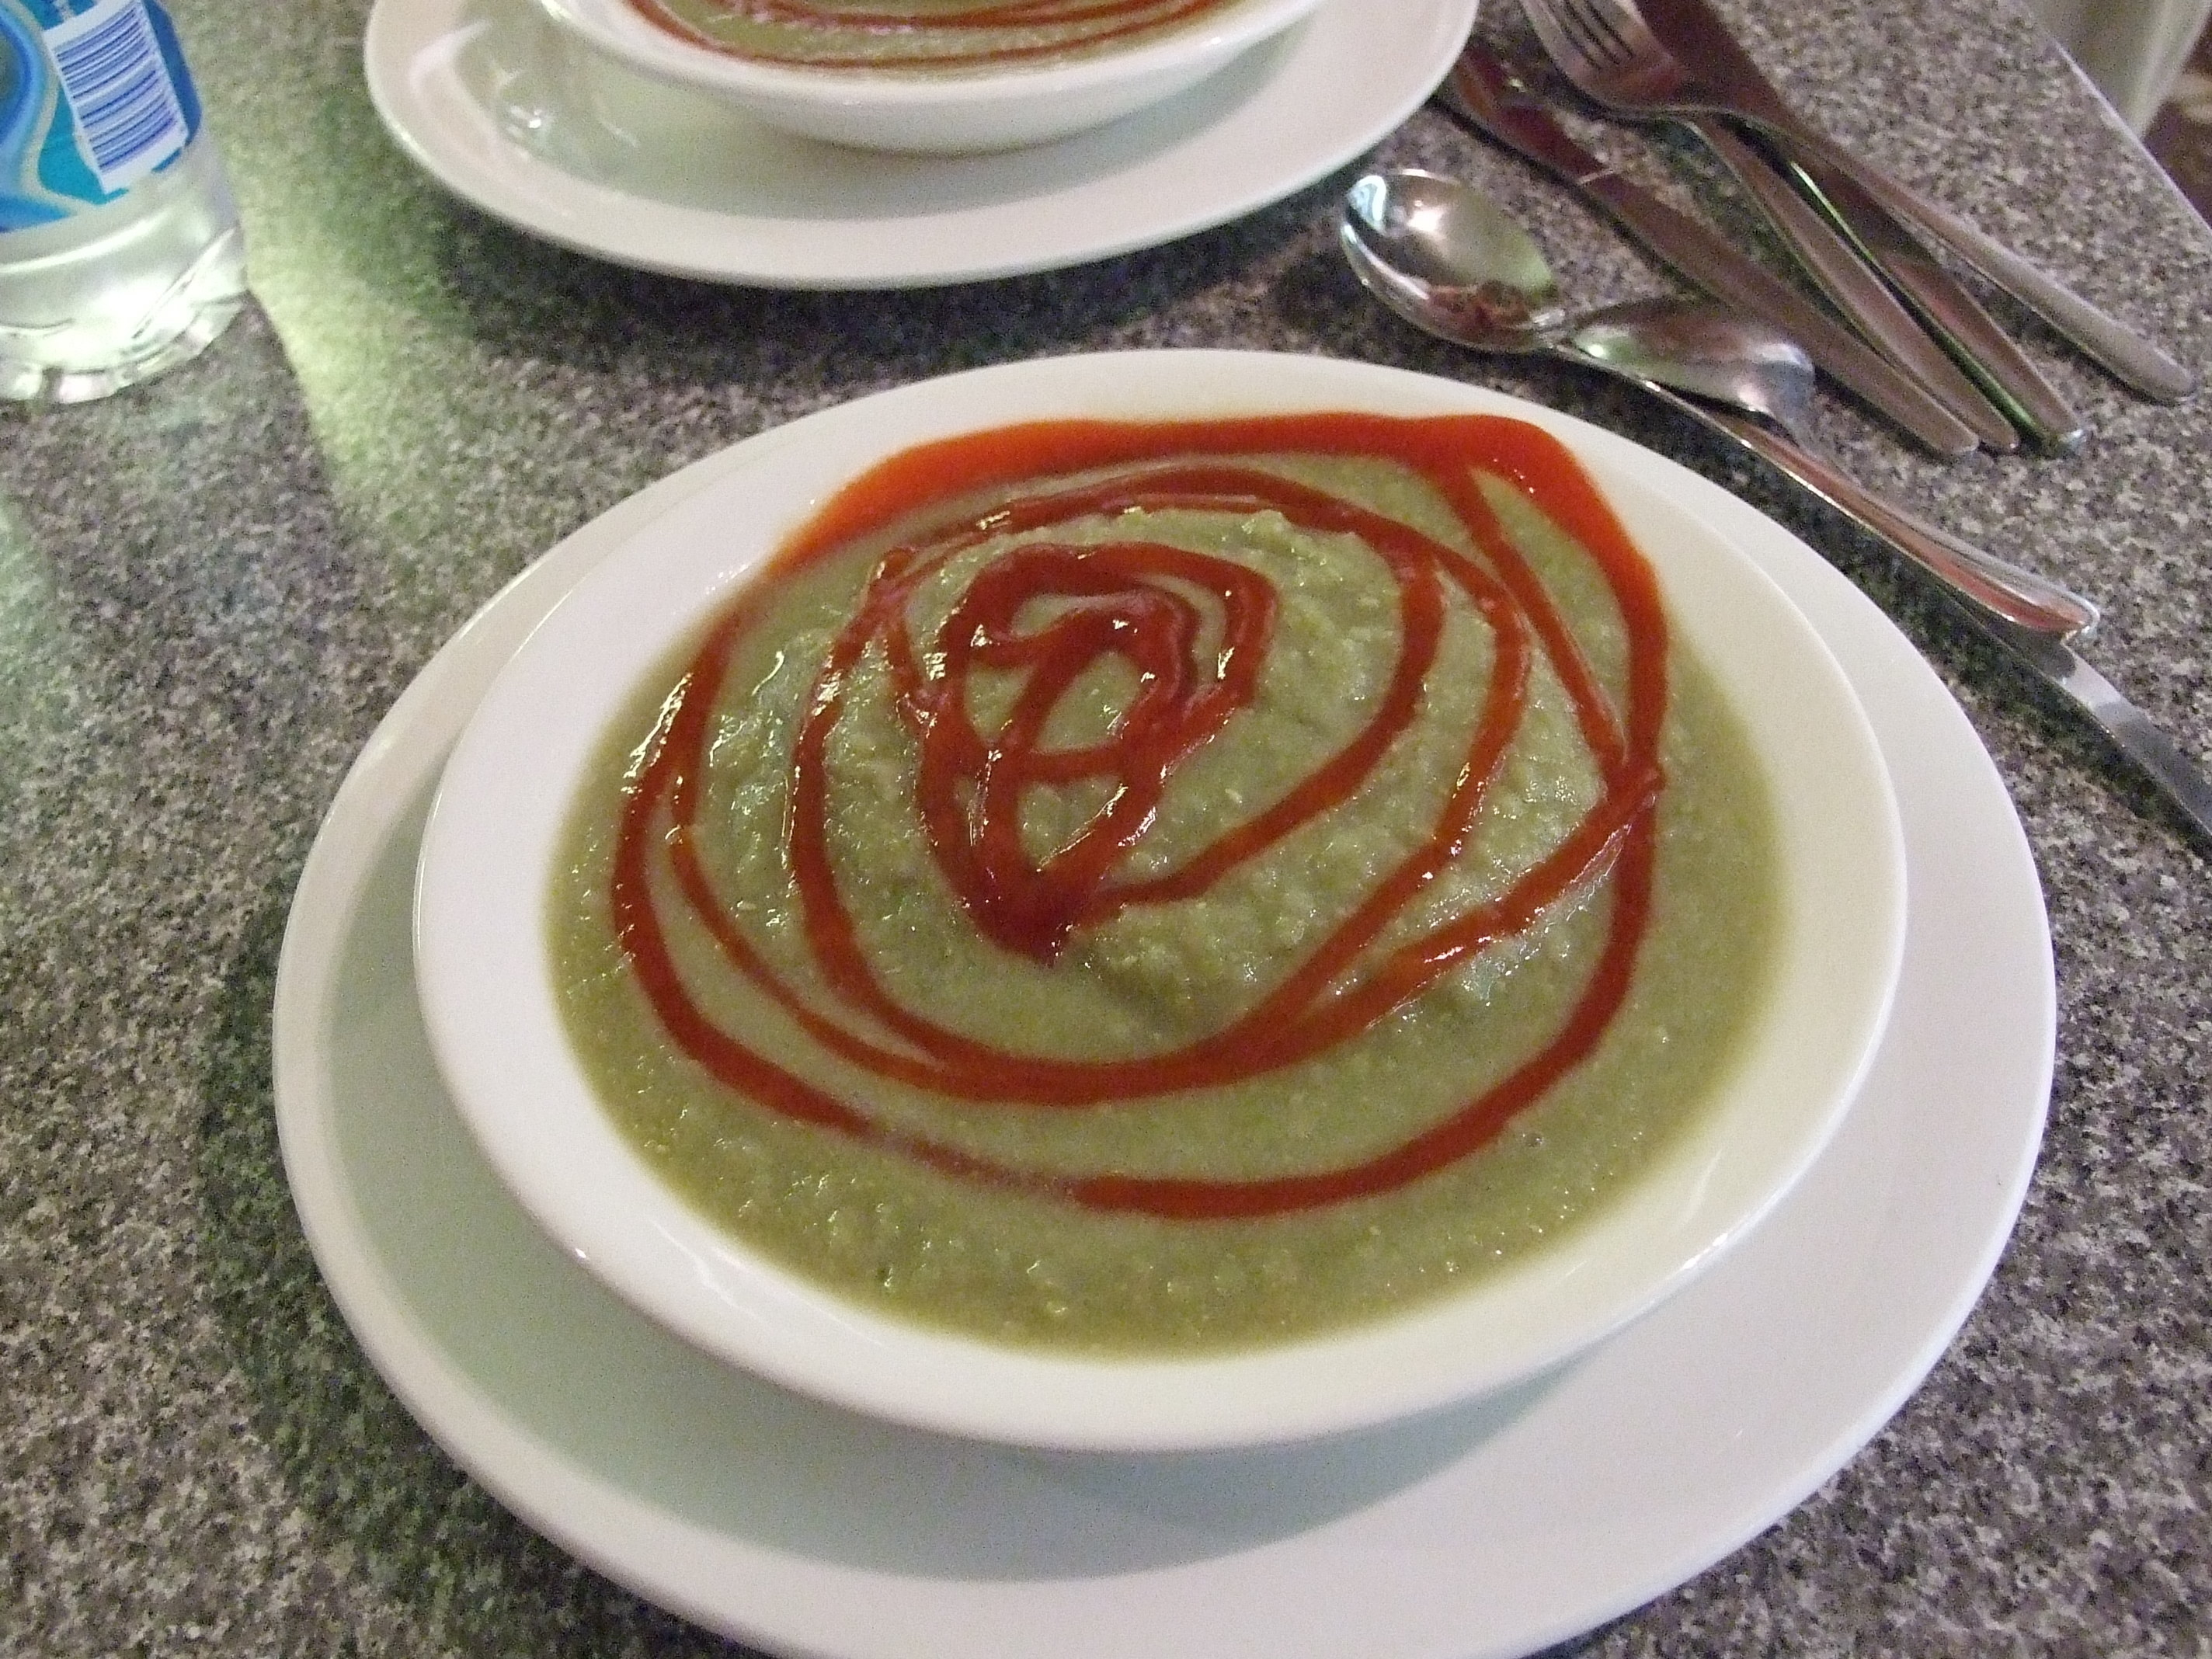 A plate filled with pea soup with a submerged meat pie with tomato sauce on top